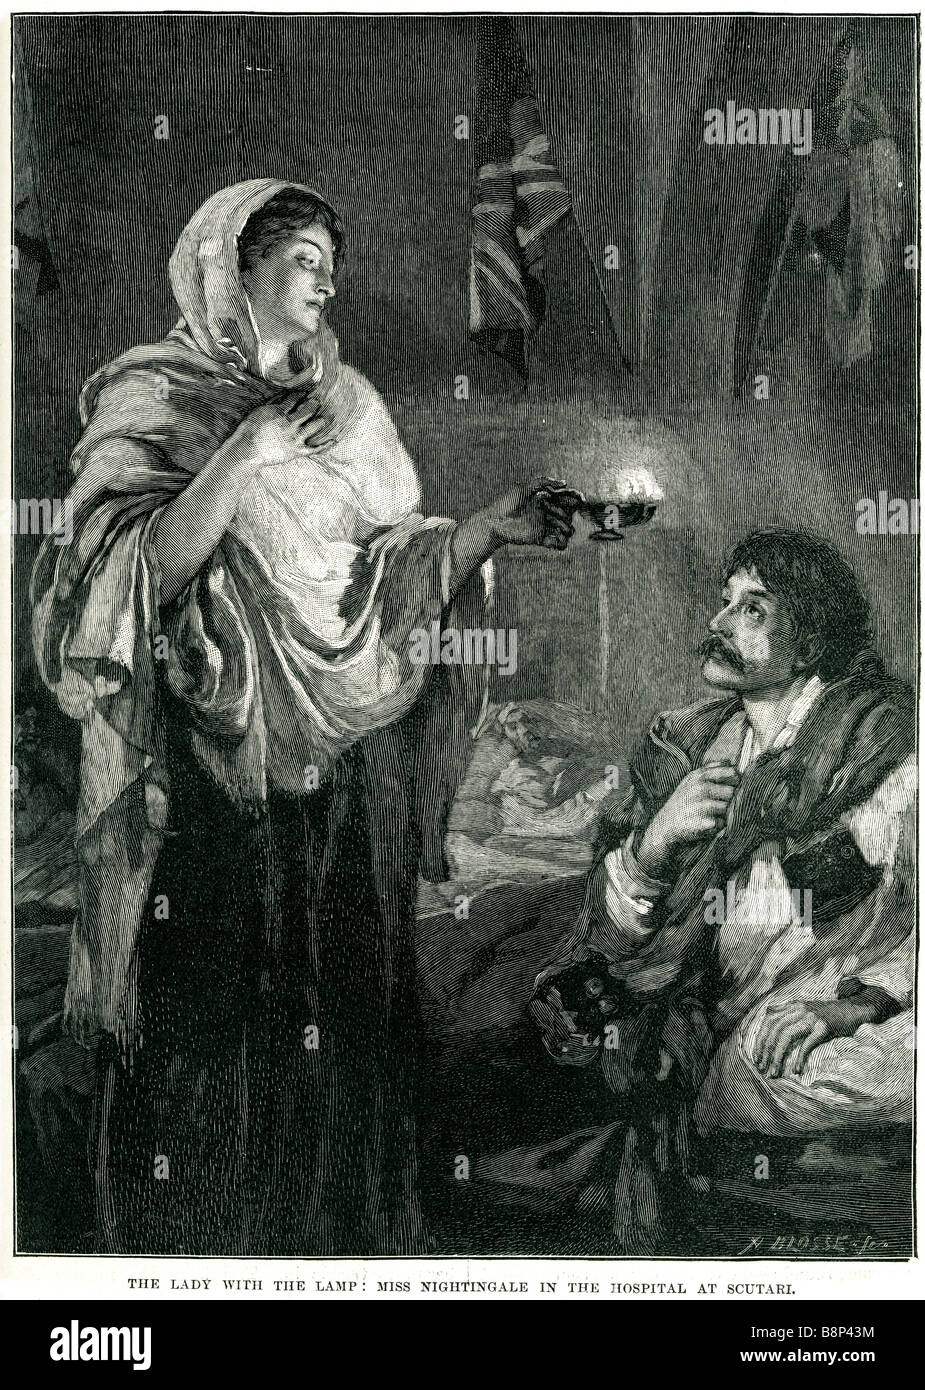 Why Was Florence Nightingale Called The Lady With The Lamp?